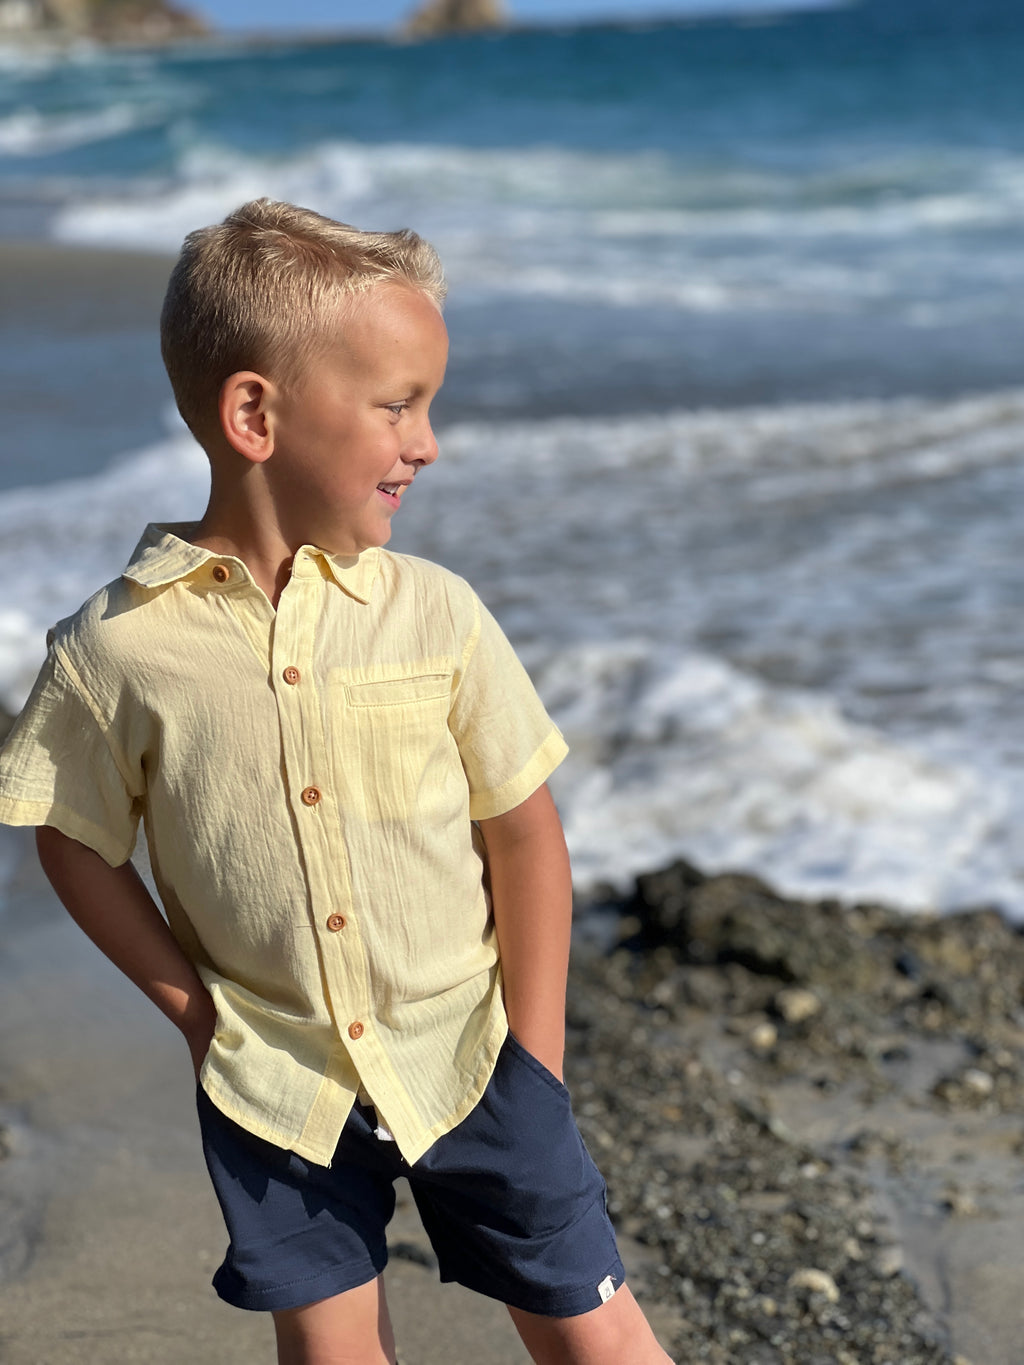 blonde hair boy wearing the lemon woven shirt and navy tiwill shorts by the sea at the beach.